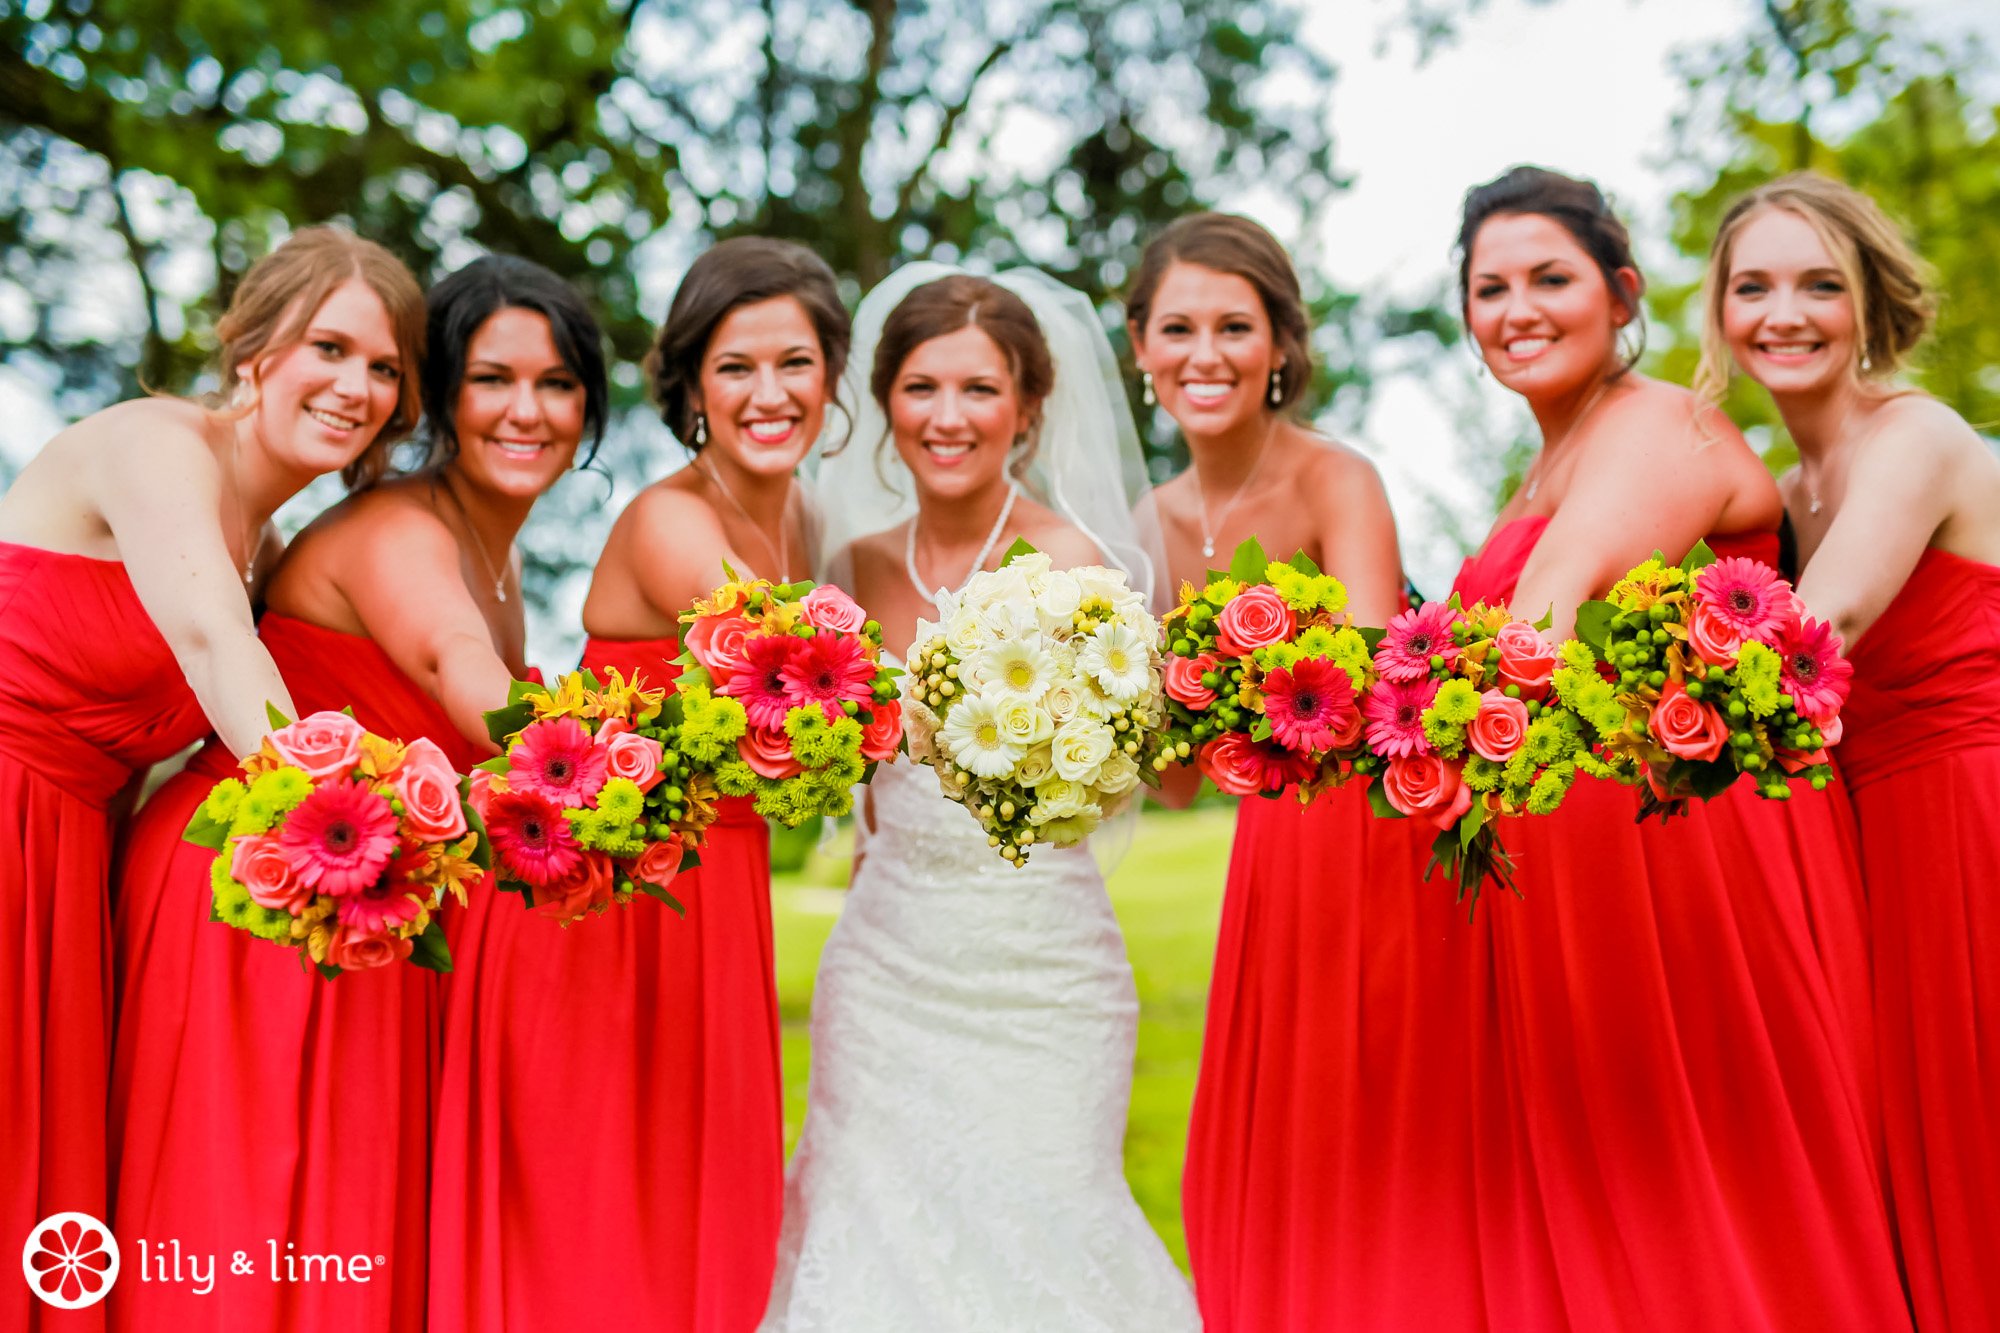 Use Bold & Bright Hues for Show-Stopping Wedding Colors | Lily & Lime